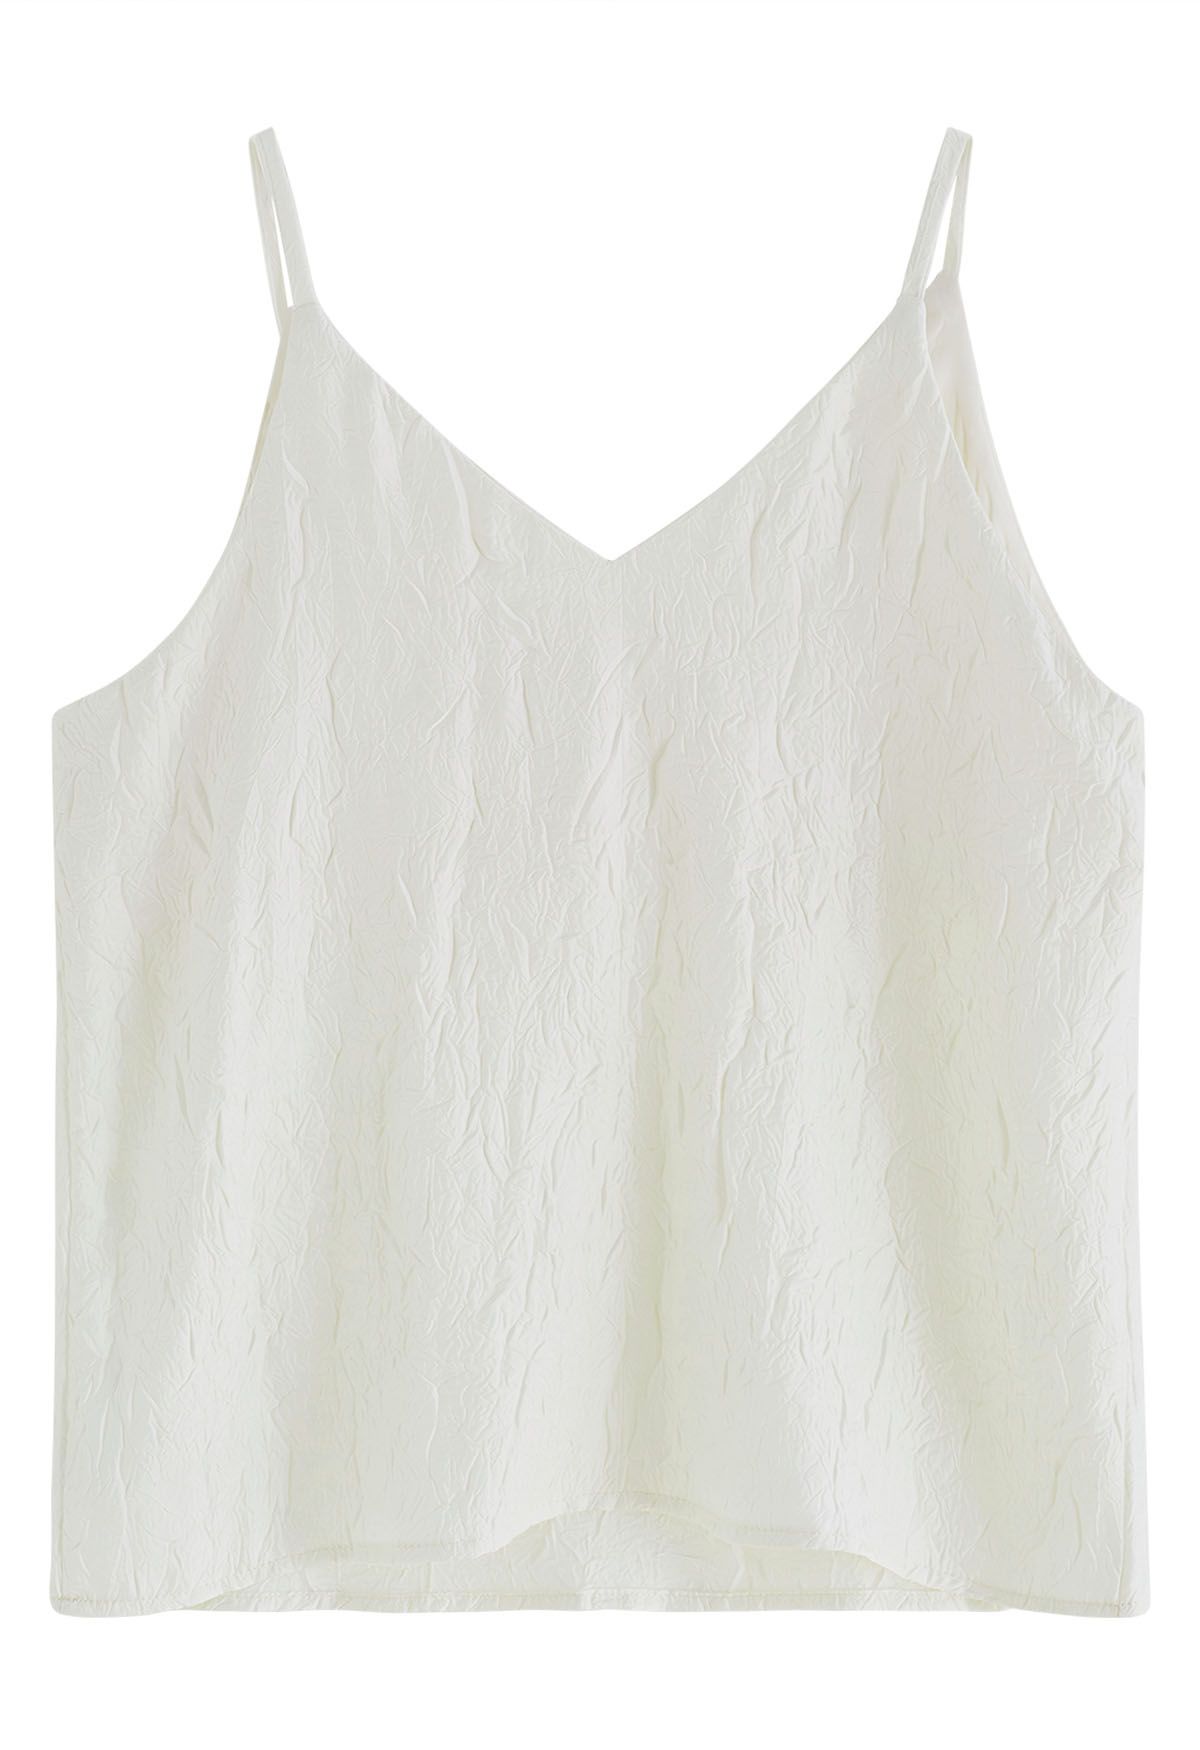 Embossed Texture V-Neck Cami Top in White - Retro, Indie and Unique Fashion